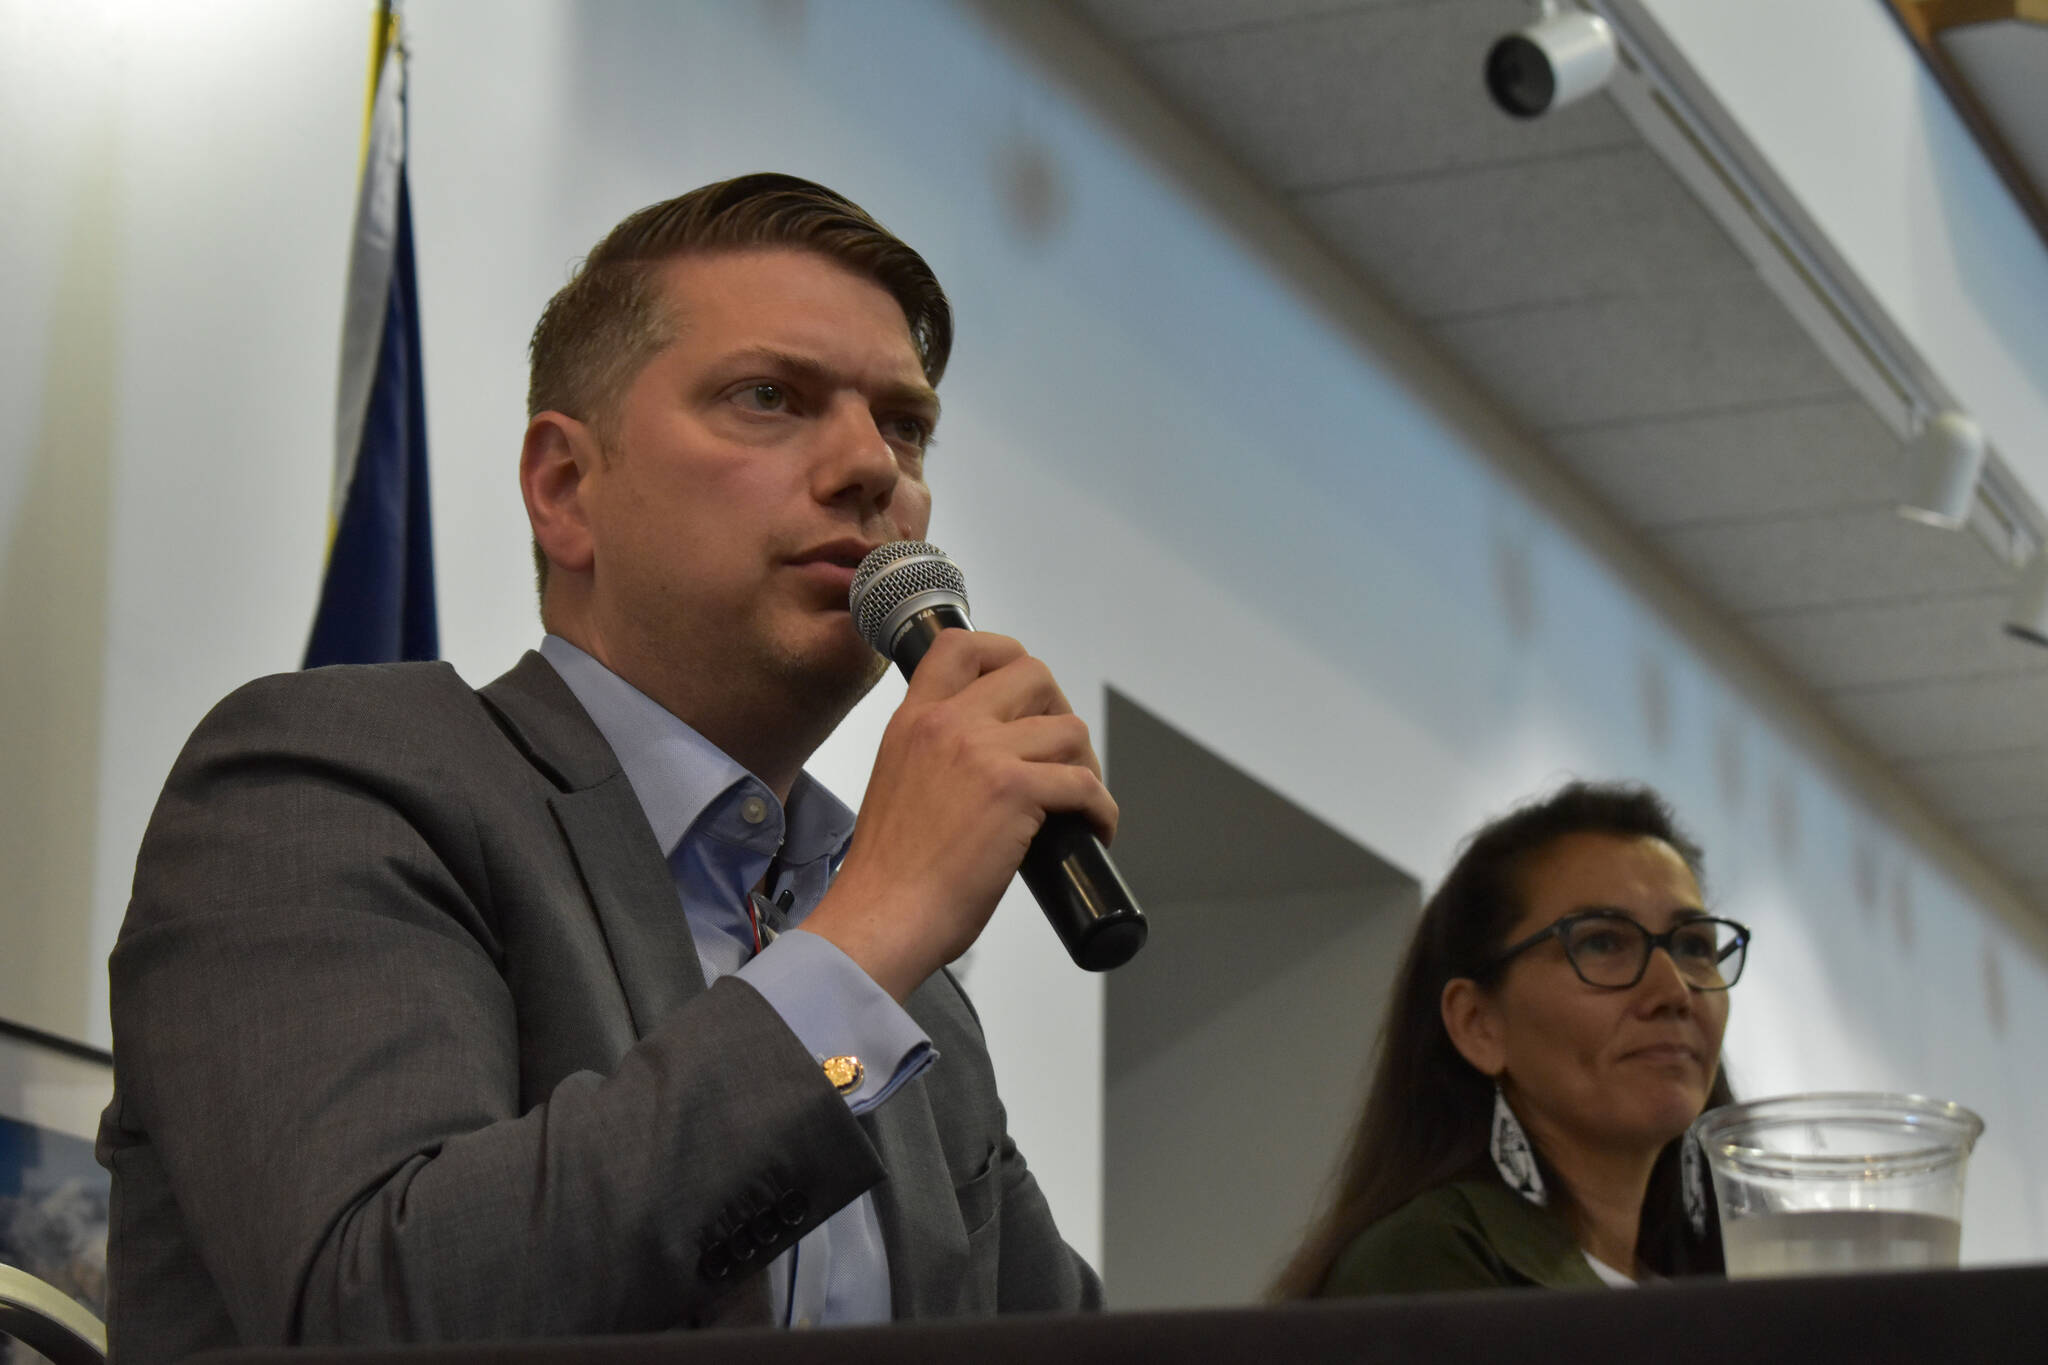 Nick Begich and Mary Peltola answer questions at a candidate forum at the Kenai Visitor Center on Aug. 3, 2022 in Kenai, Alaska. (Peninsula Clarion/Jake Dye)